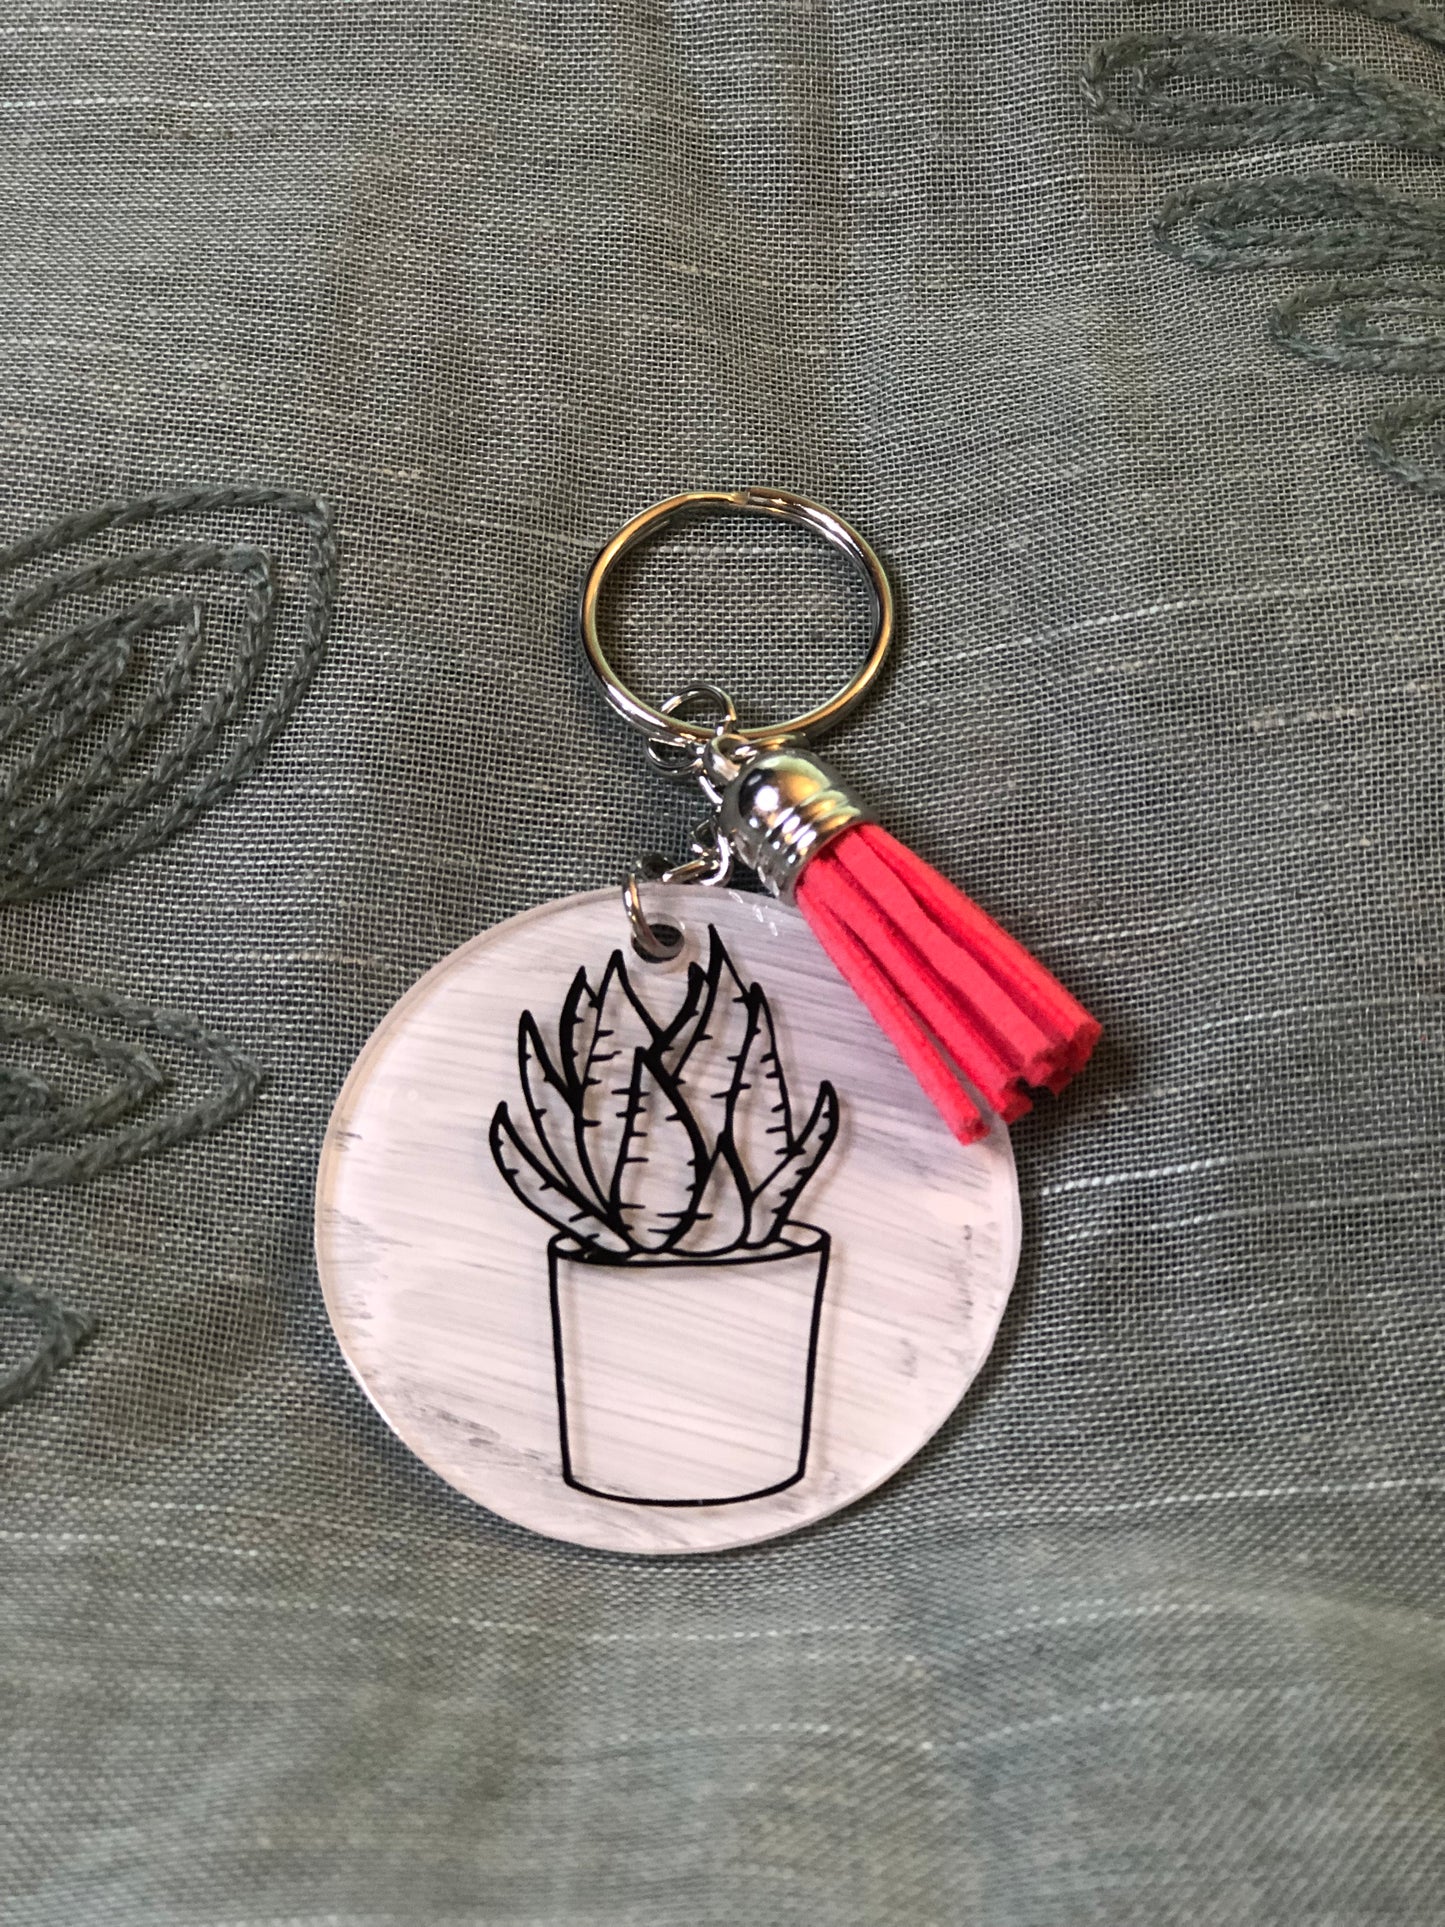 Touch of Natural Elegance - Acrylic Succulent Keychain!